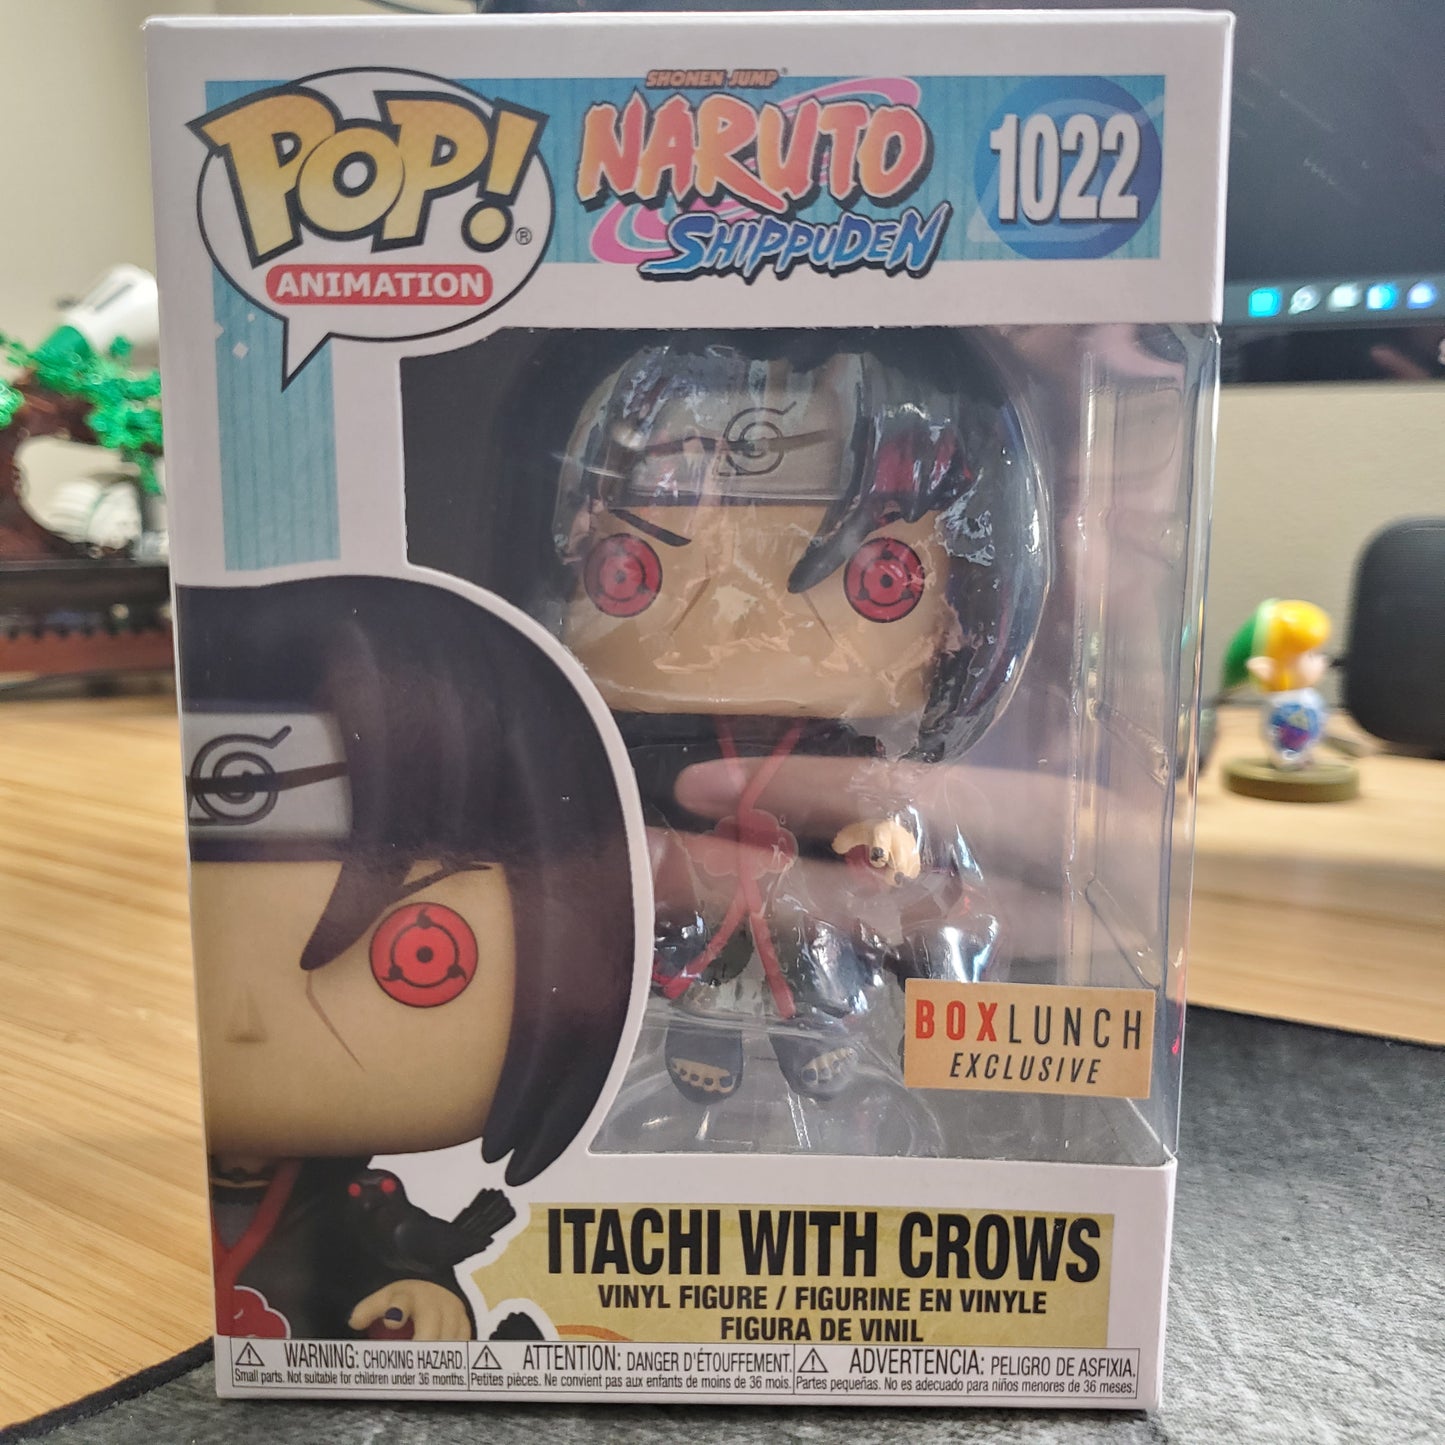 Funko Pop! Itachi with Crows, Naruto Shippuden (1022) Excl. to BoxLunch